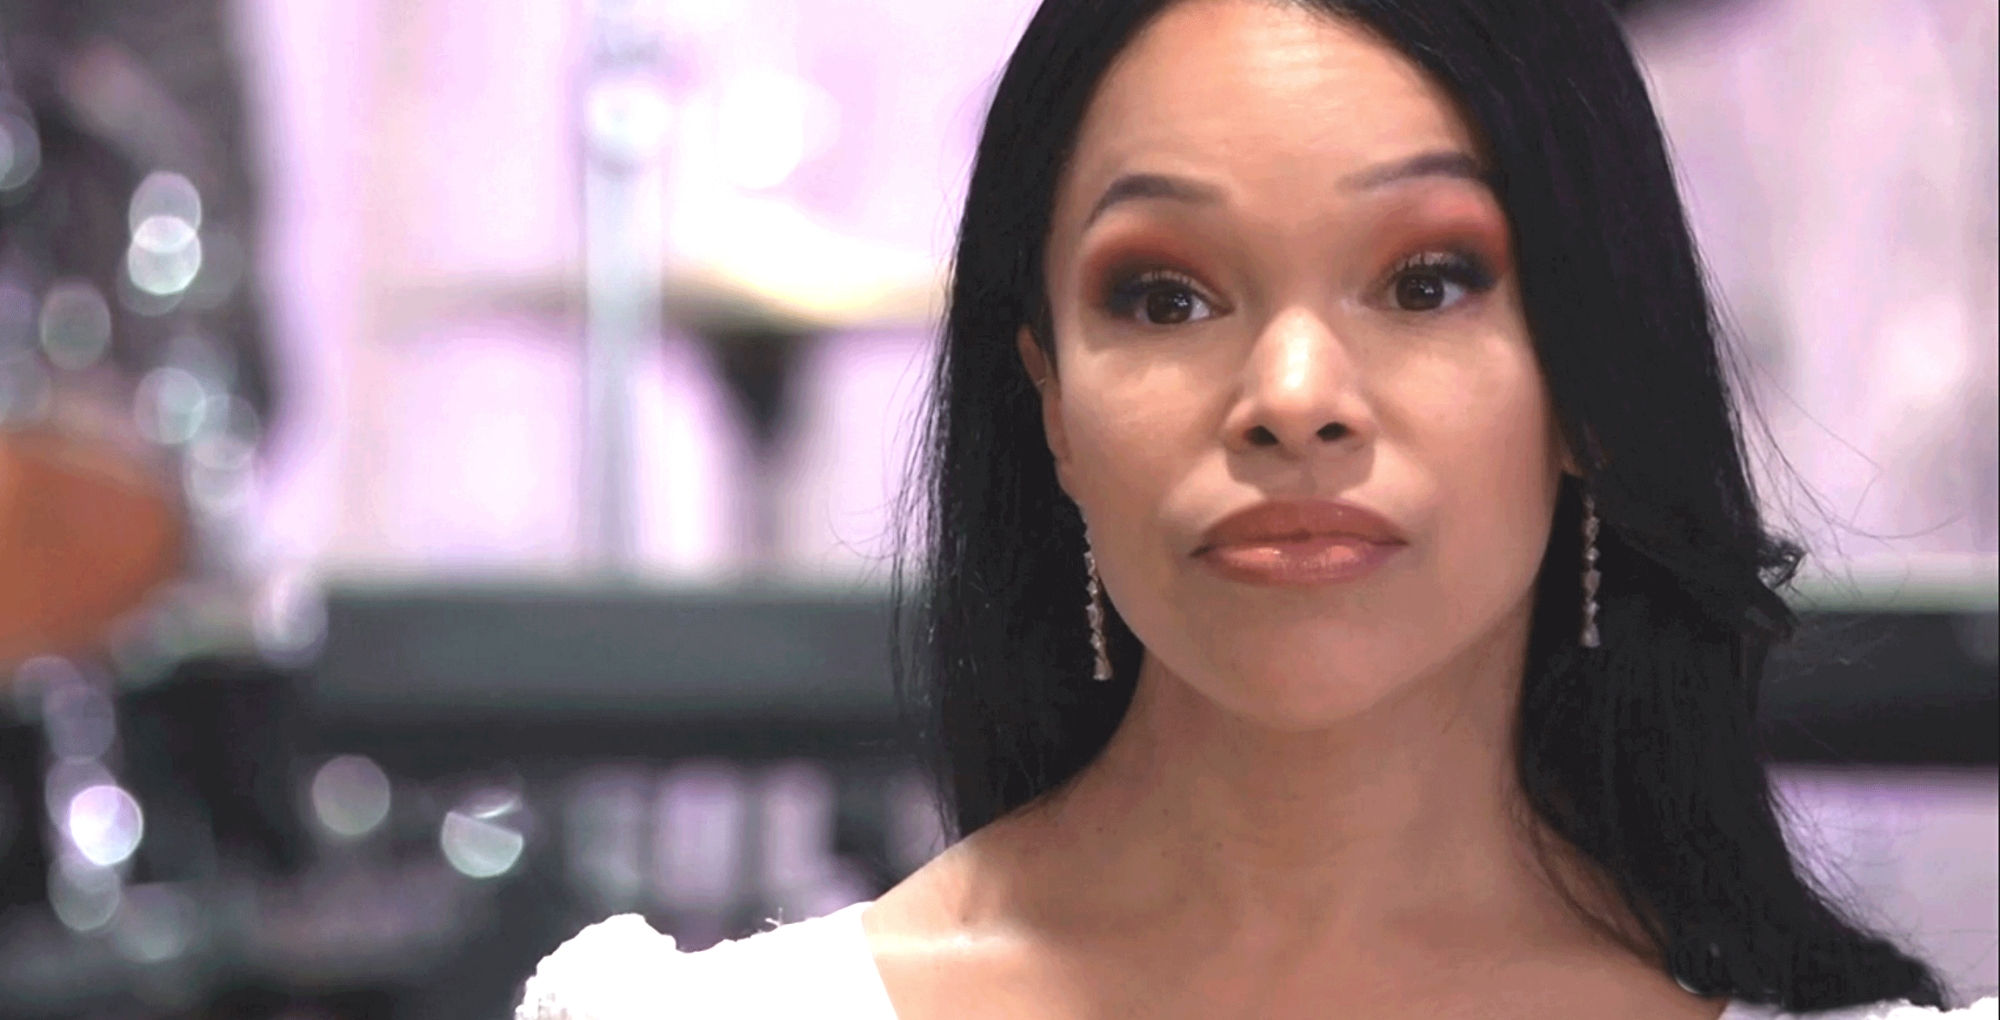 general hospital spoilers tease that portia just got married and now has to tell the truth